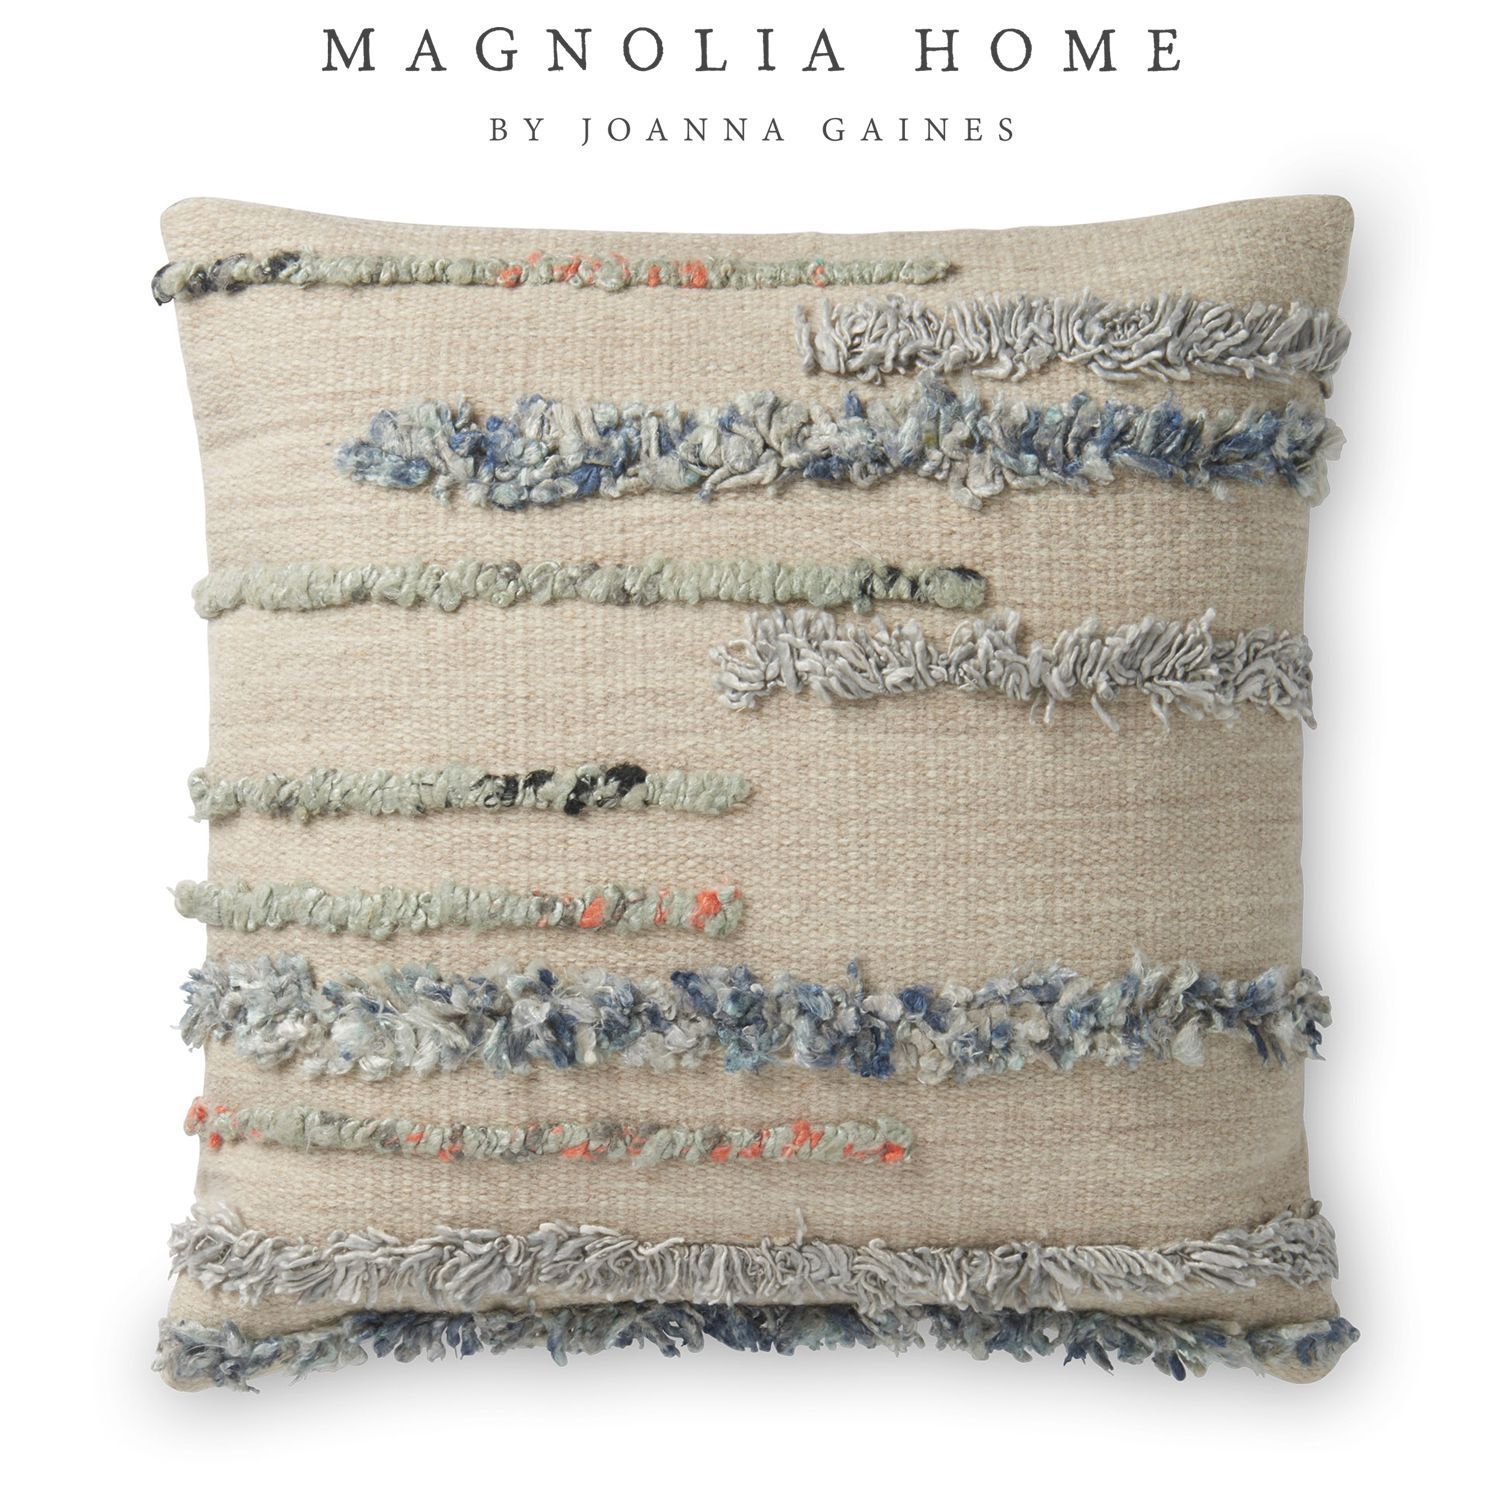 Magnolia Home Harper Pillow | Pier 1 Imports | Magnolia Intended For Magnolia Sectional Sofas With Pillows (View 1 of 15)